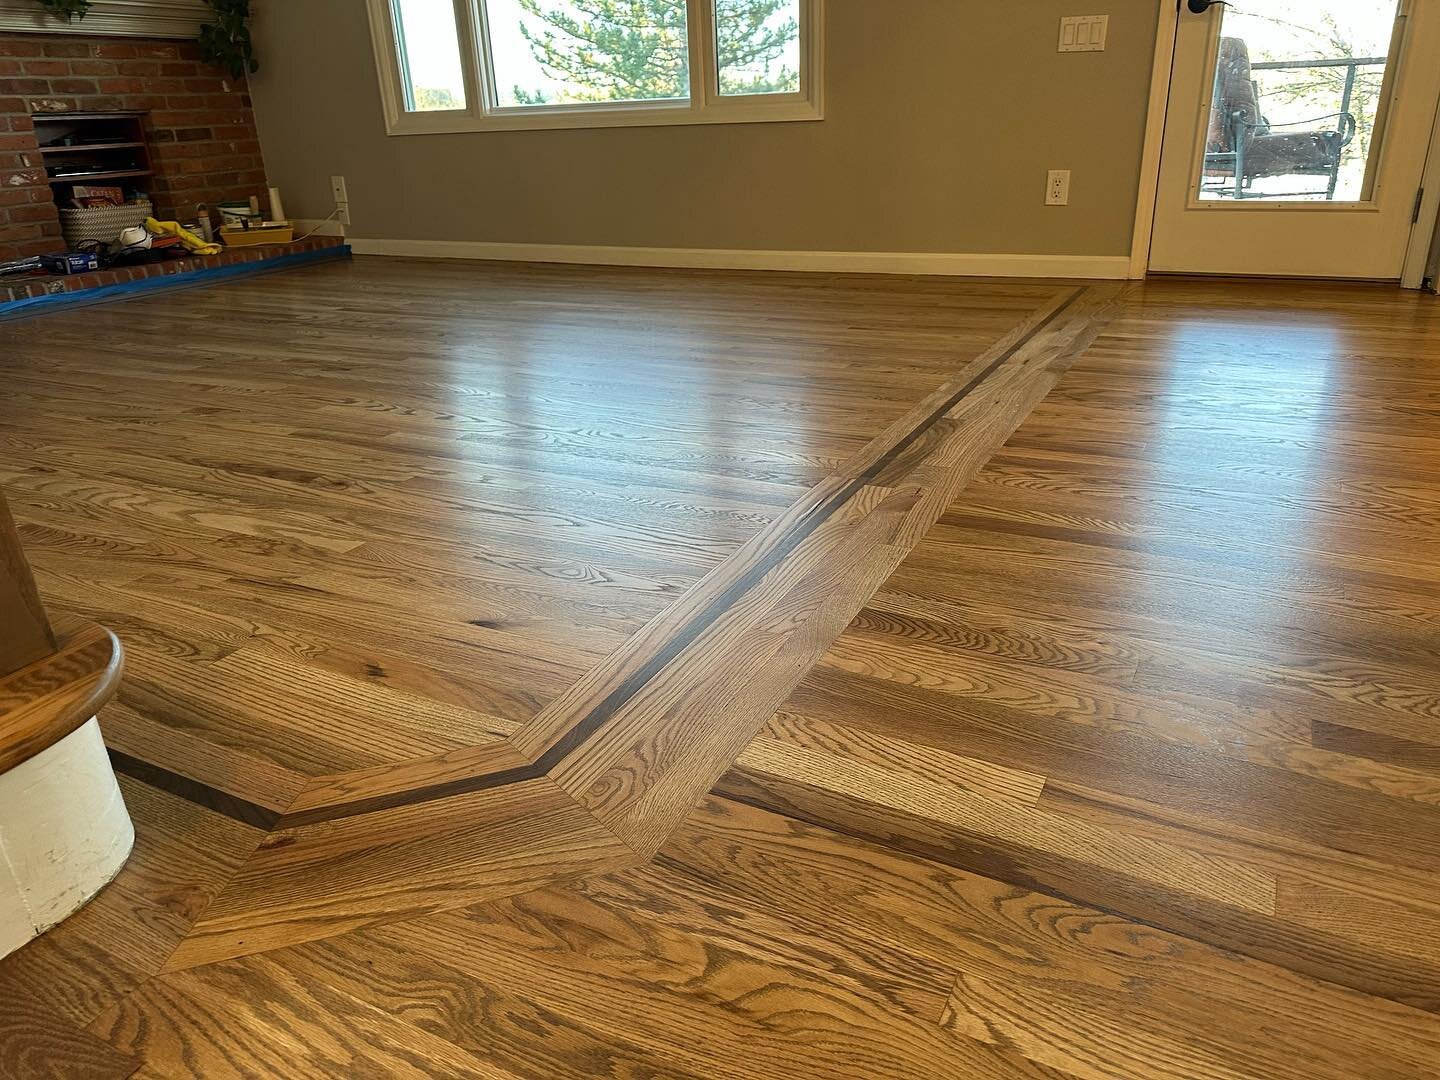 Finished these floors with a mix of colors for a really cool family! #hardwoodflooring #littetoncolorado #denverrealestate #denvermetrodesigner